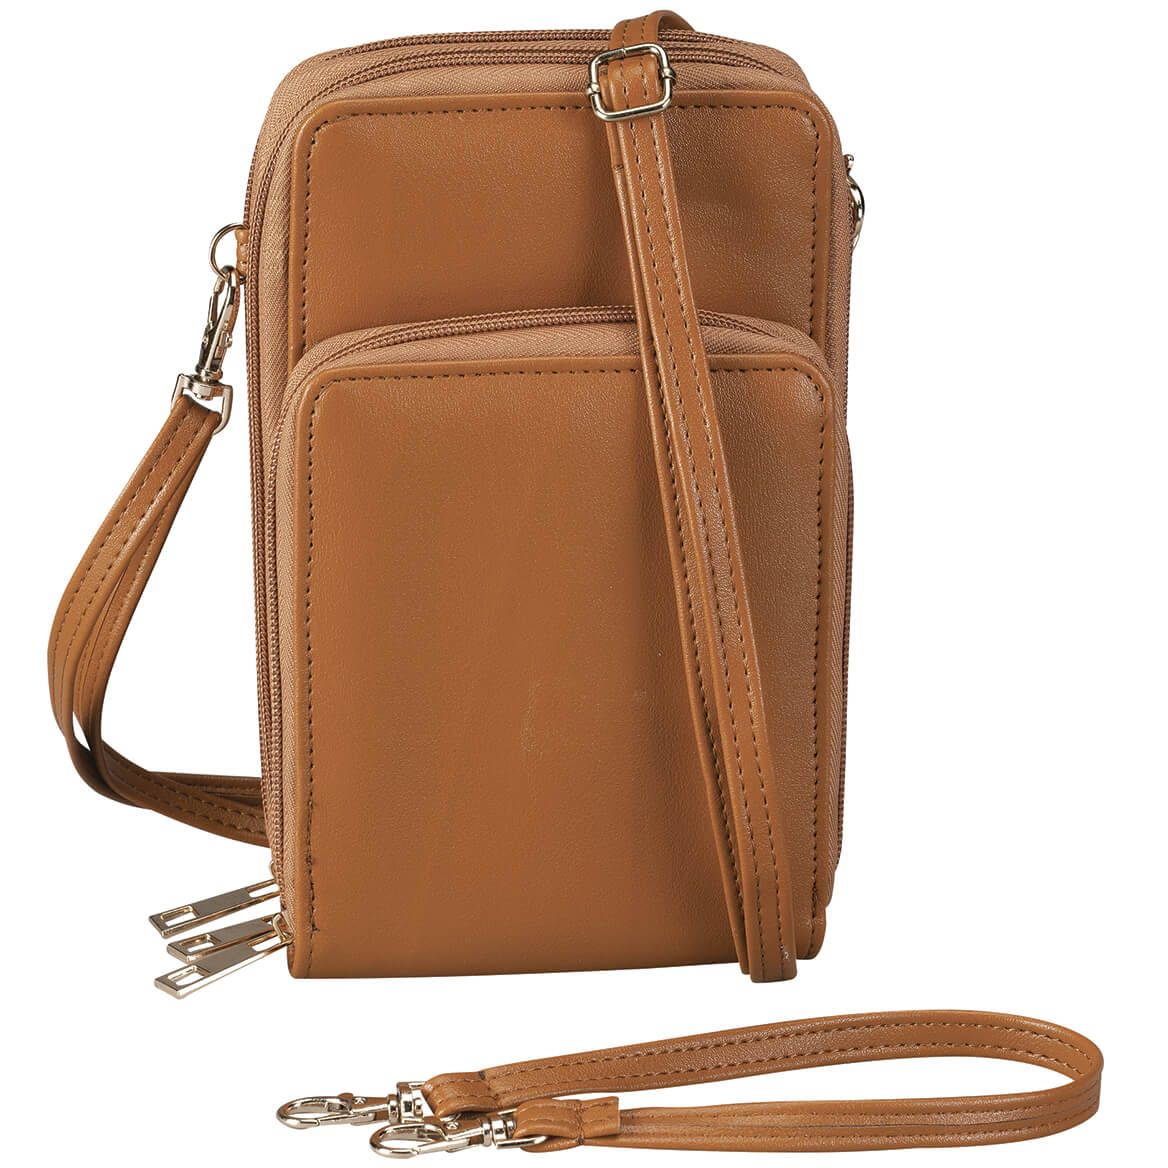 Camel Cellphone Purse with Touch Screen + '-' + 373607